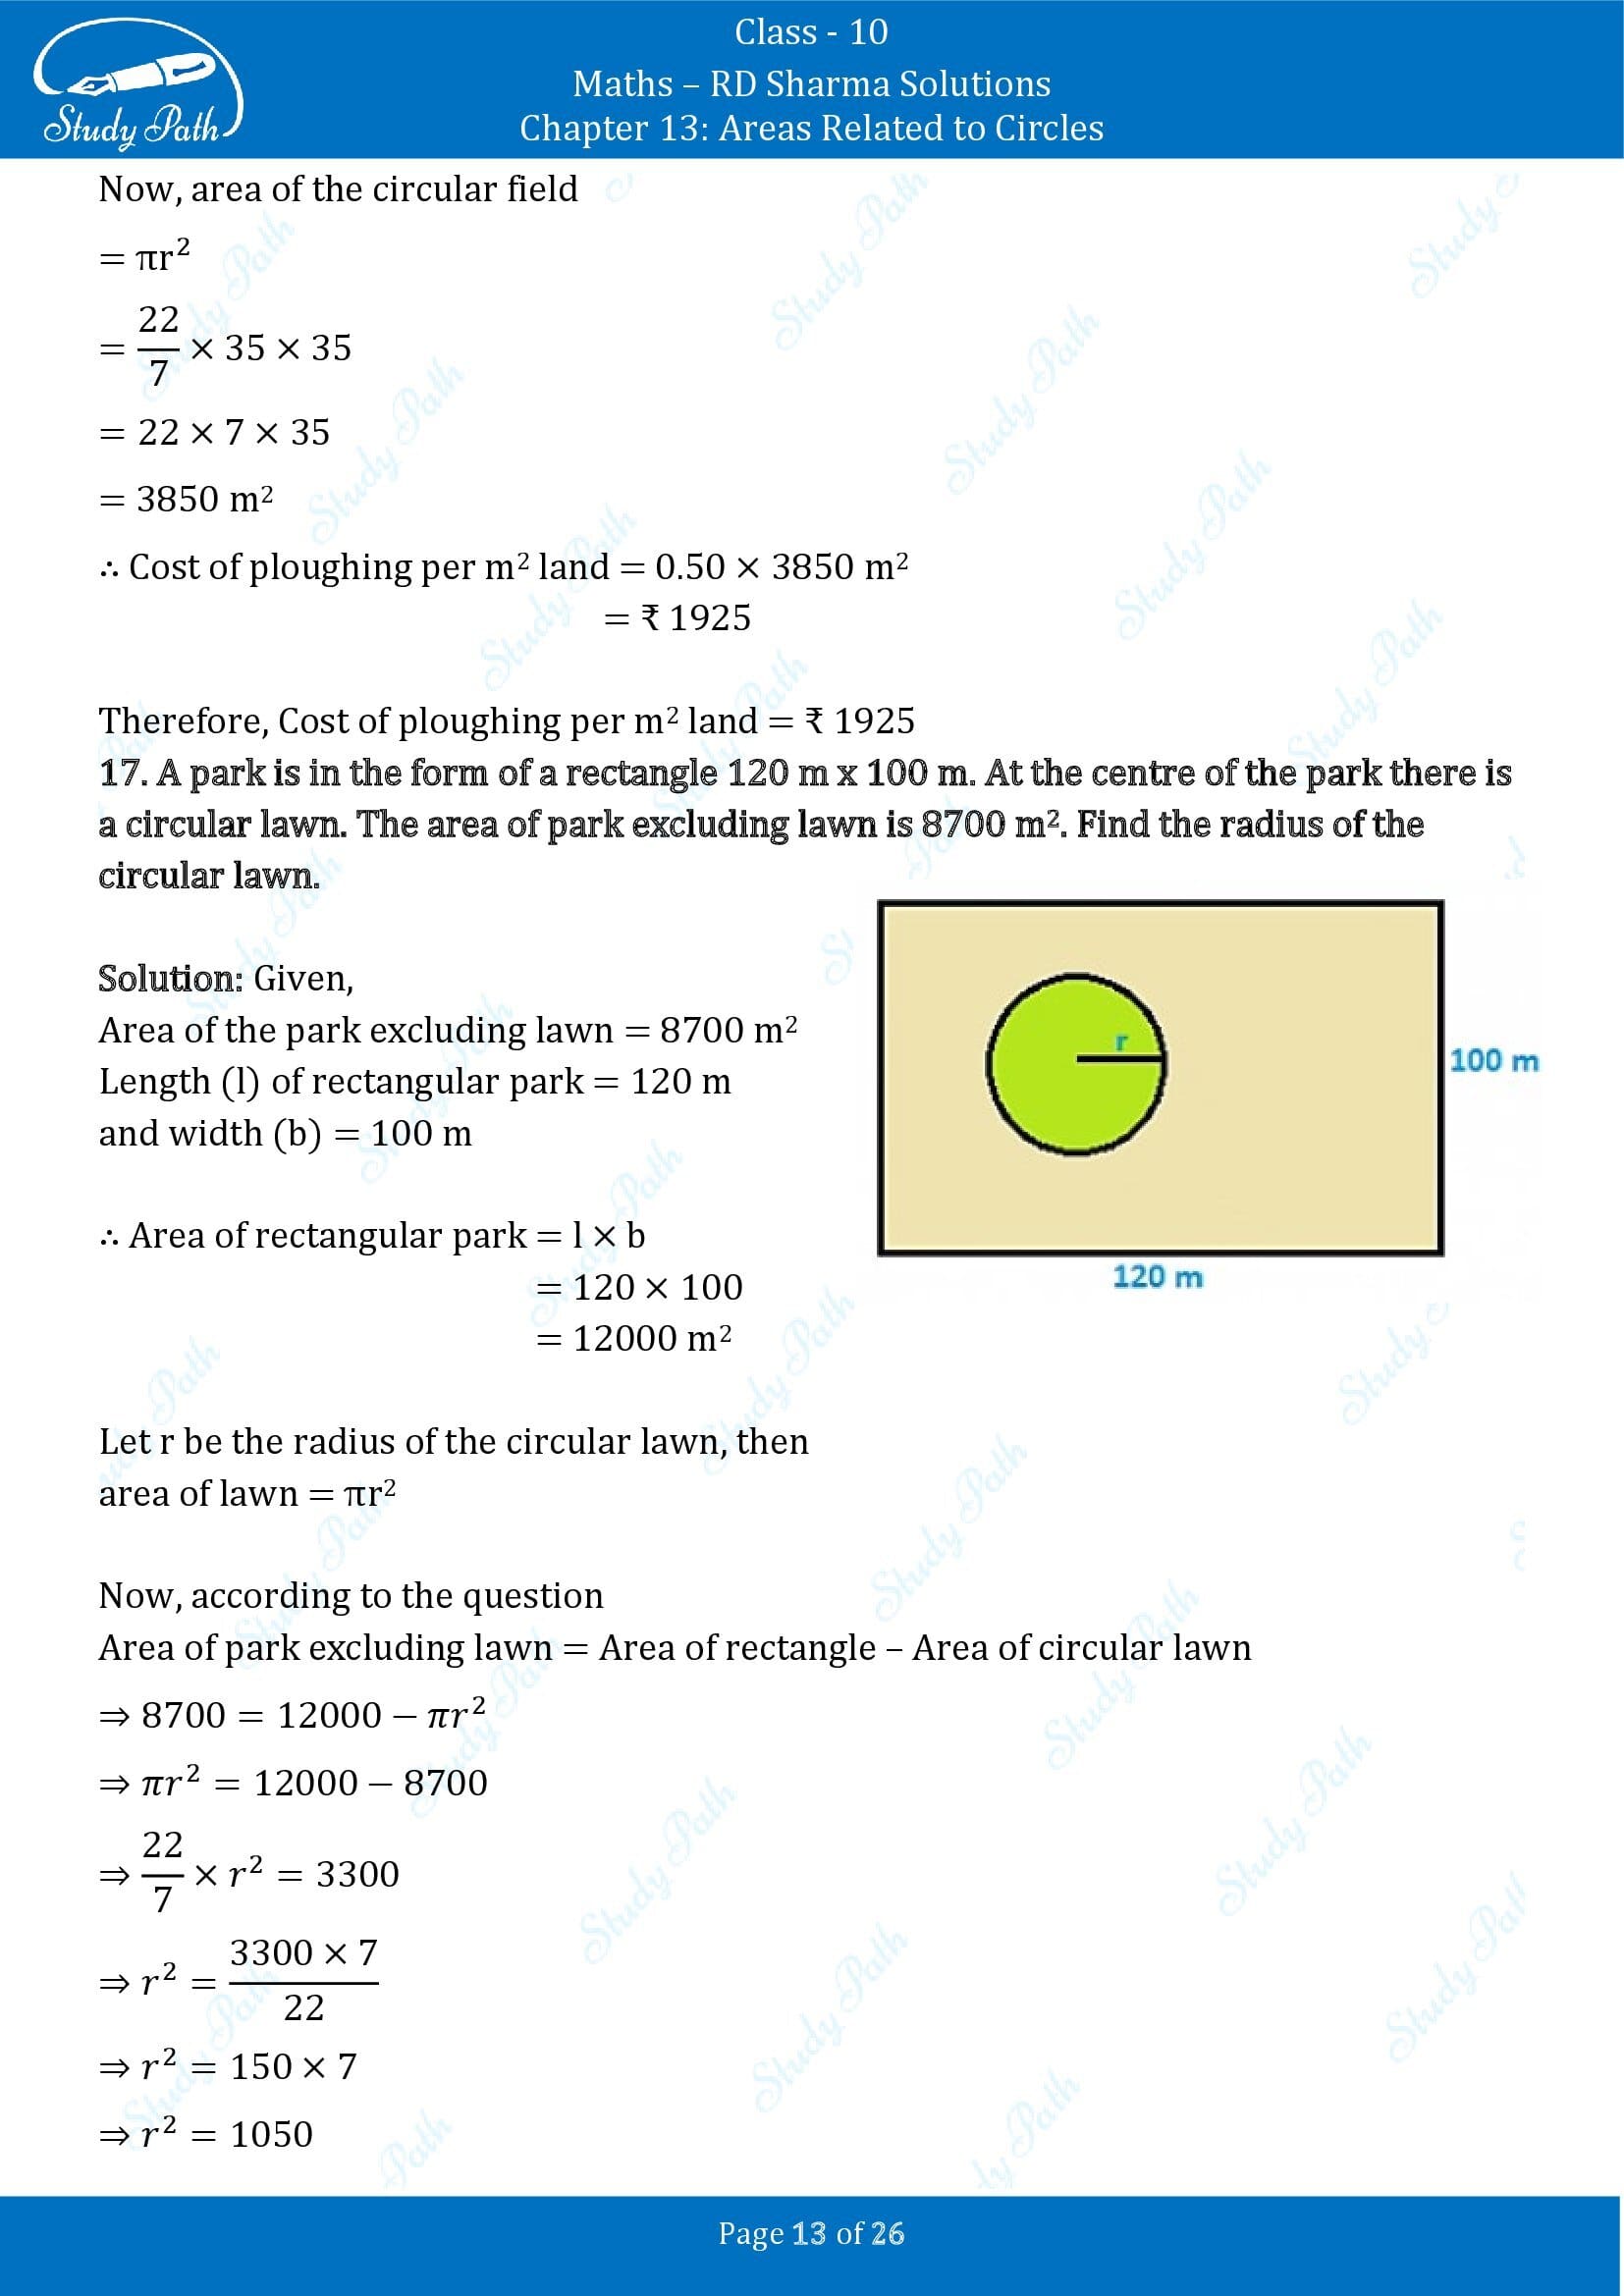 RD Sharma Solutions Class 10 Chapter 13 Areas Related to Circles Exercise 13.1 00013